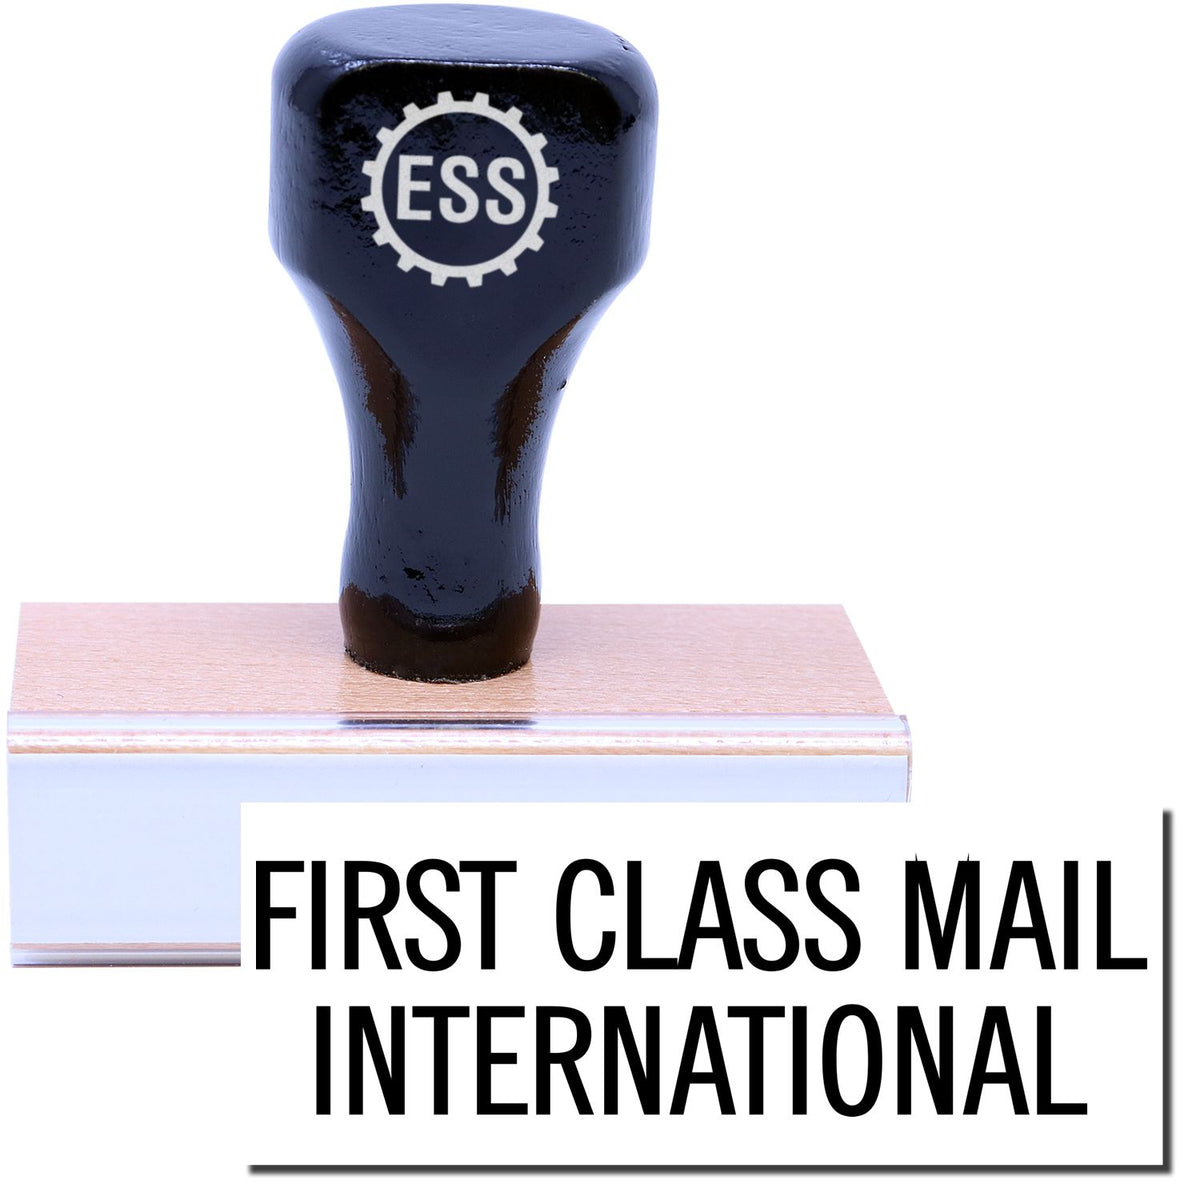 A stock office rubber stamp with a stamped image showing how the text &quot;FIRST CLASS MAIL INTERNATIONAL&quot; is displayed after stamping.